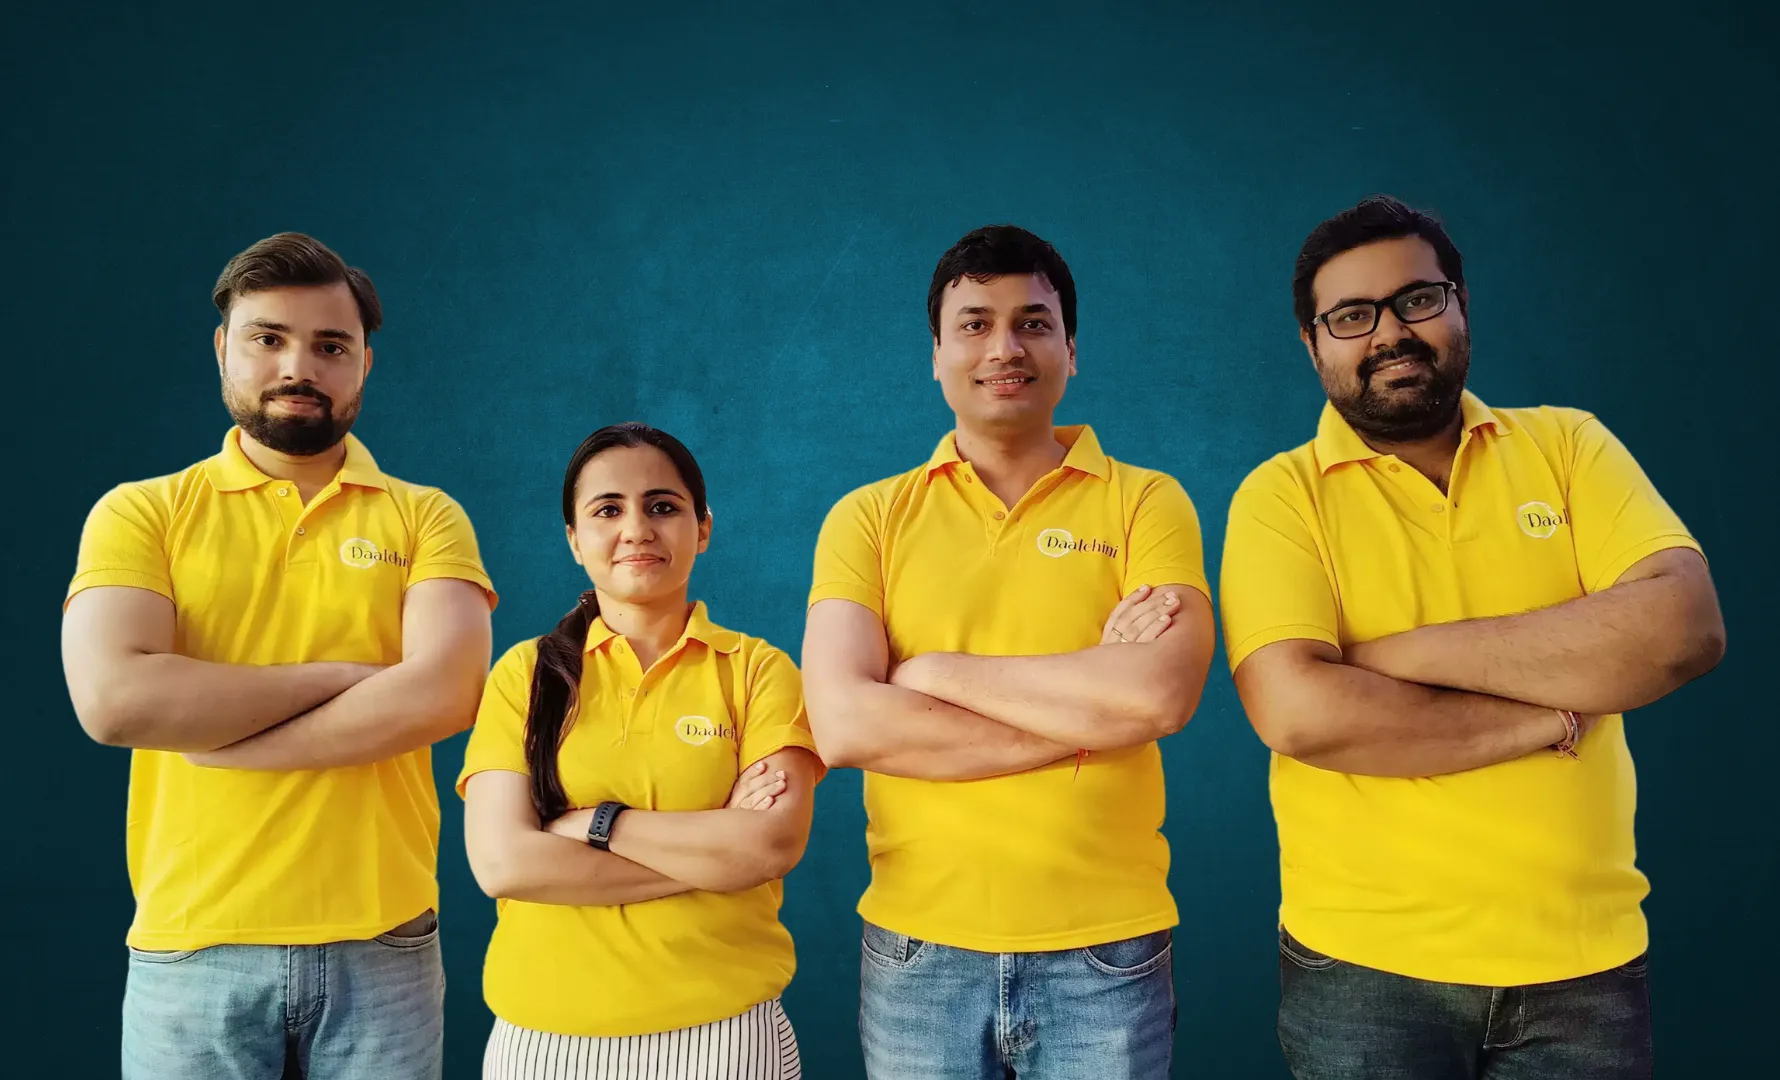 Daalchini, a retail tech startup, has raised $4 million in funding led by Unicorn India Ventures